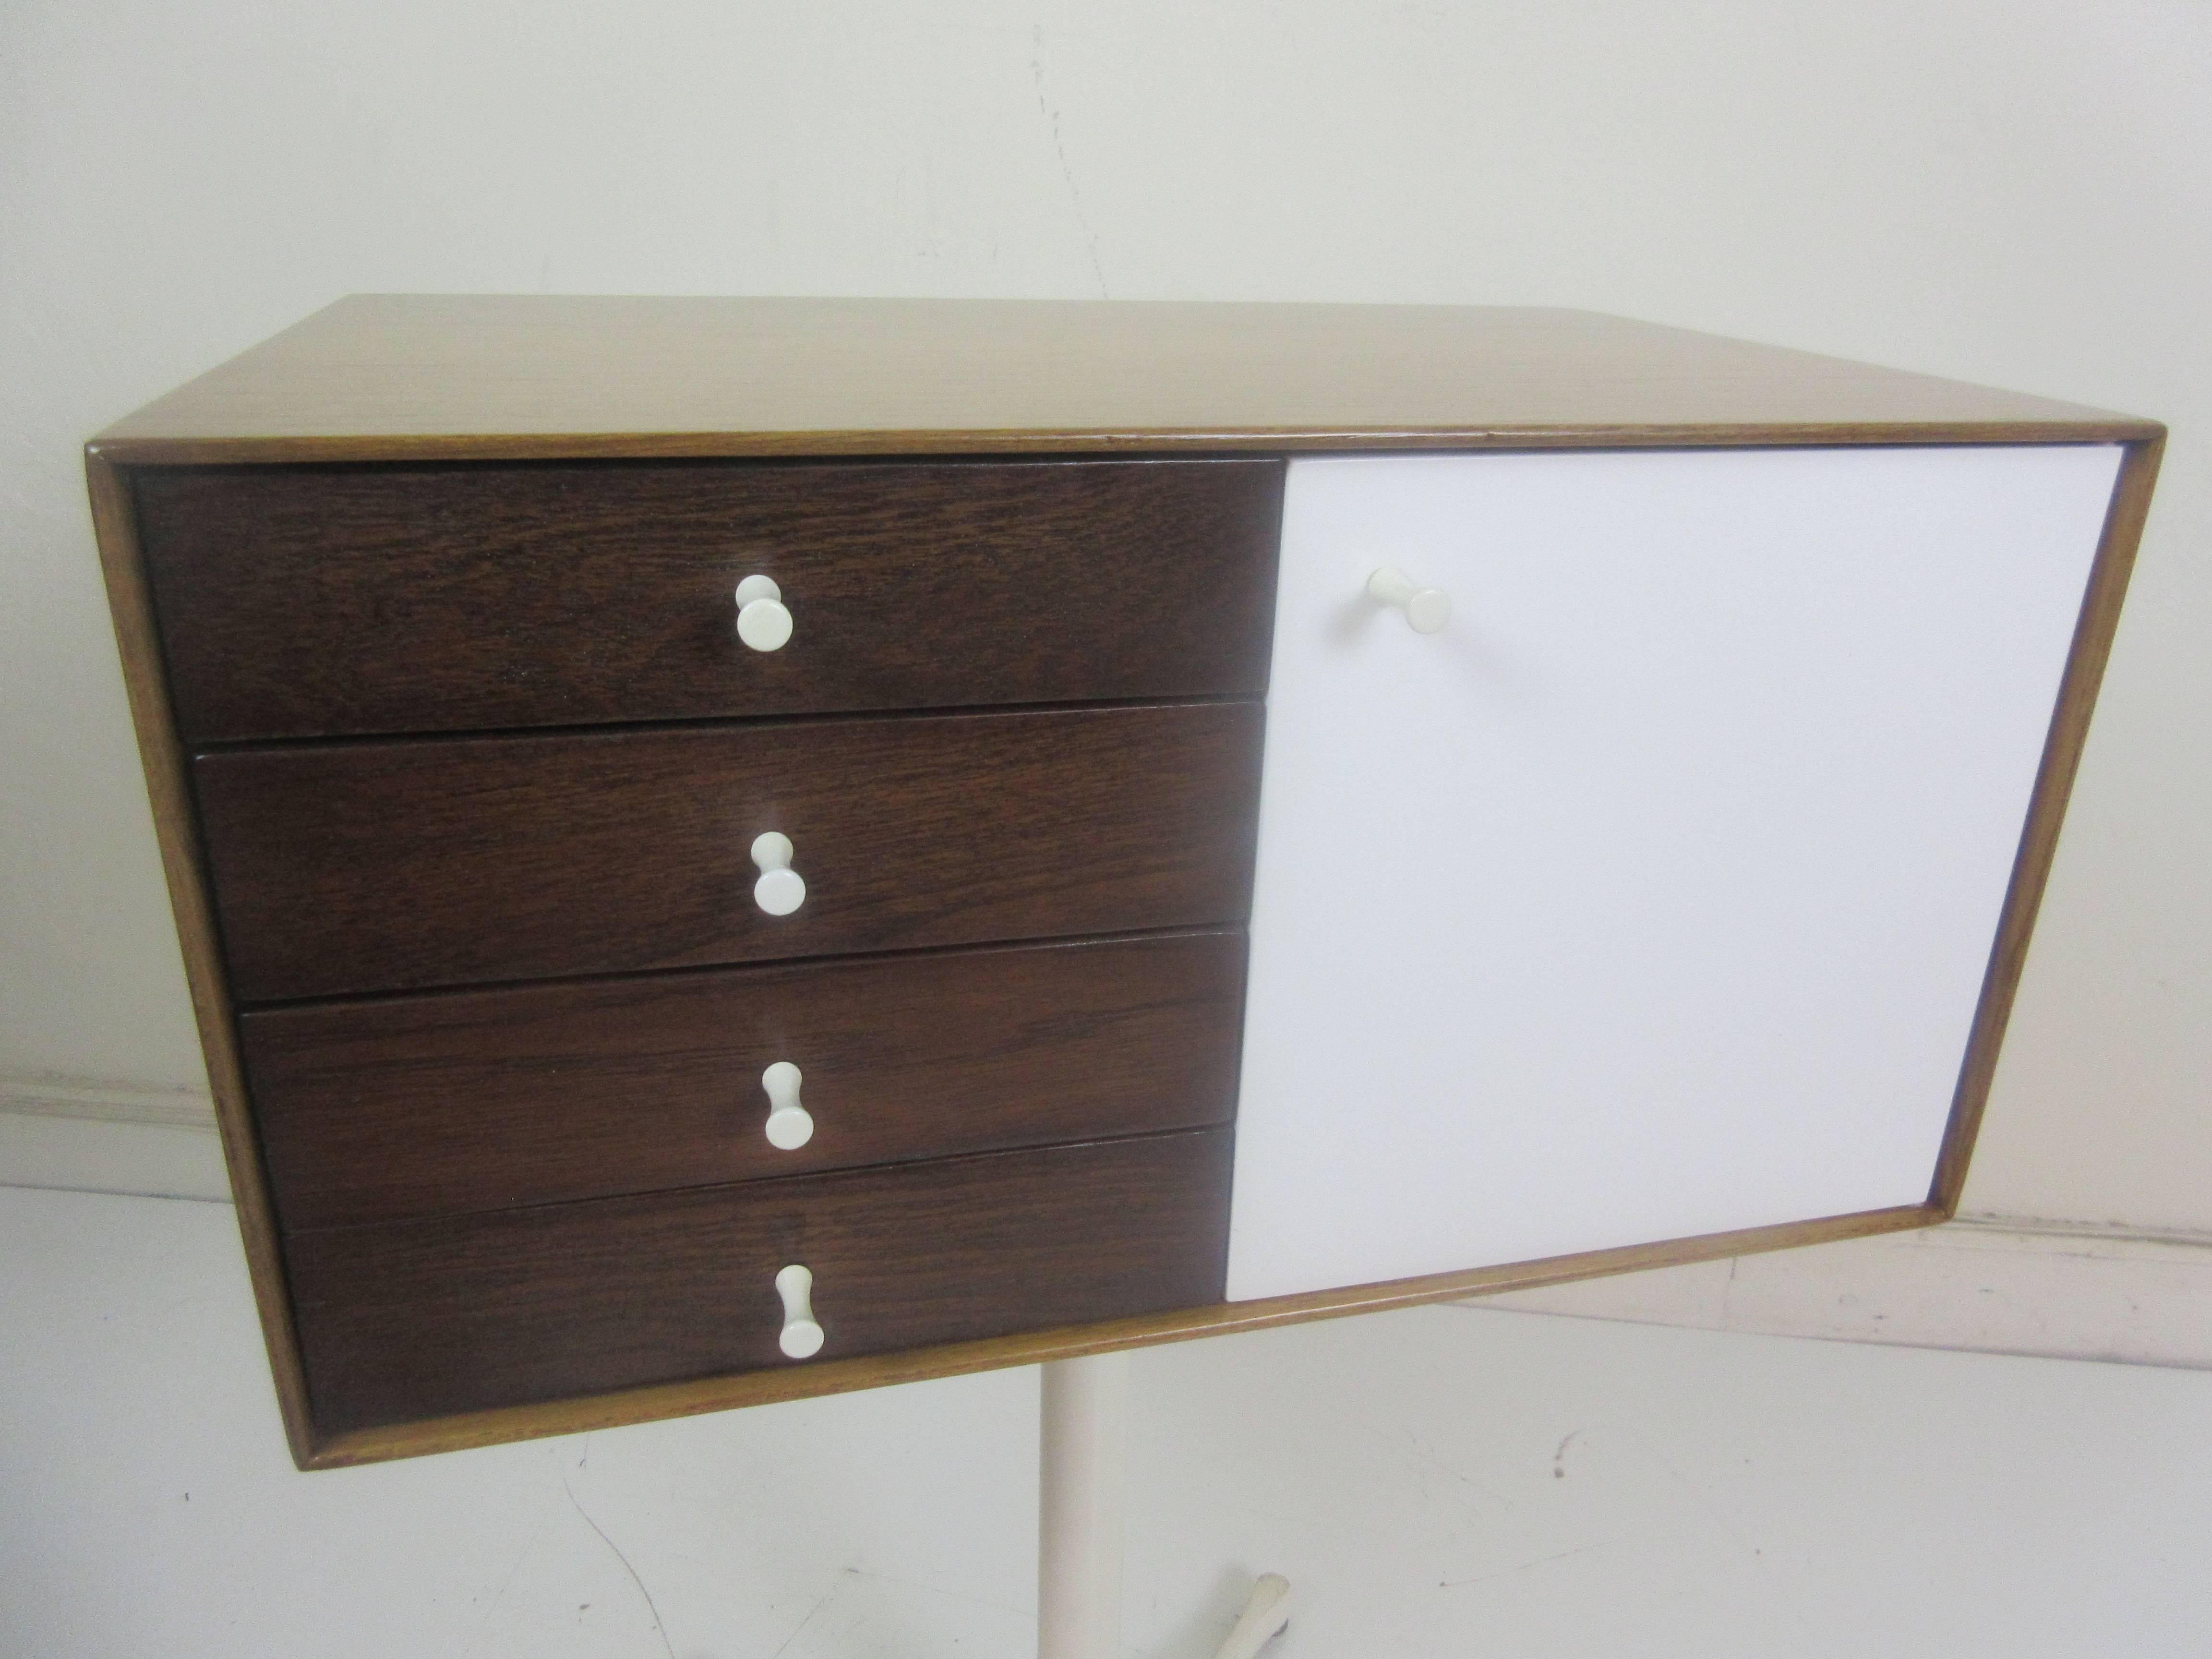 George Nelson miniature jewelry chest for Herman Miller on swag stand model 5211. This version is in teak on all sides with cream lacquered large door and rosewood drawers. All knobs in great original condition. Stamp on bottom identifies this as